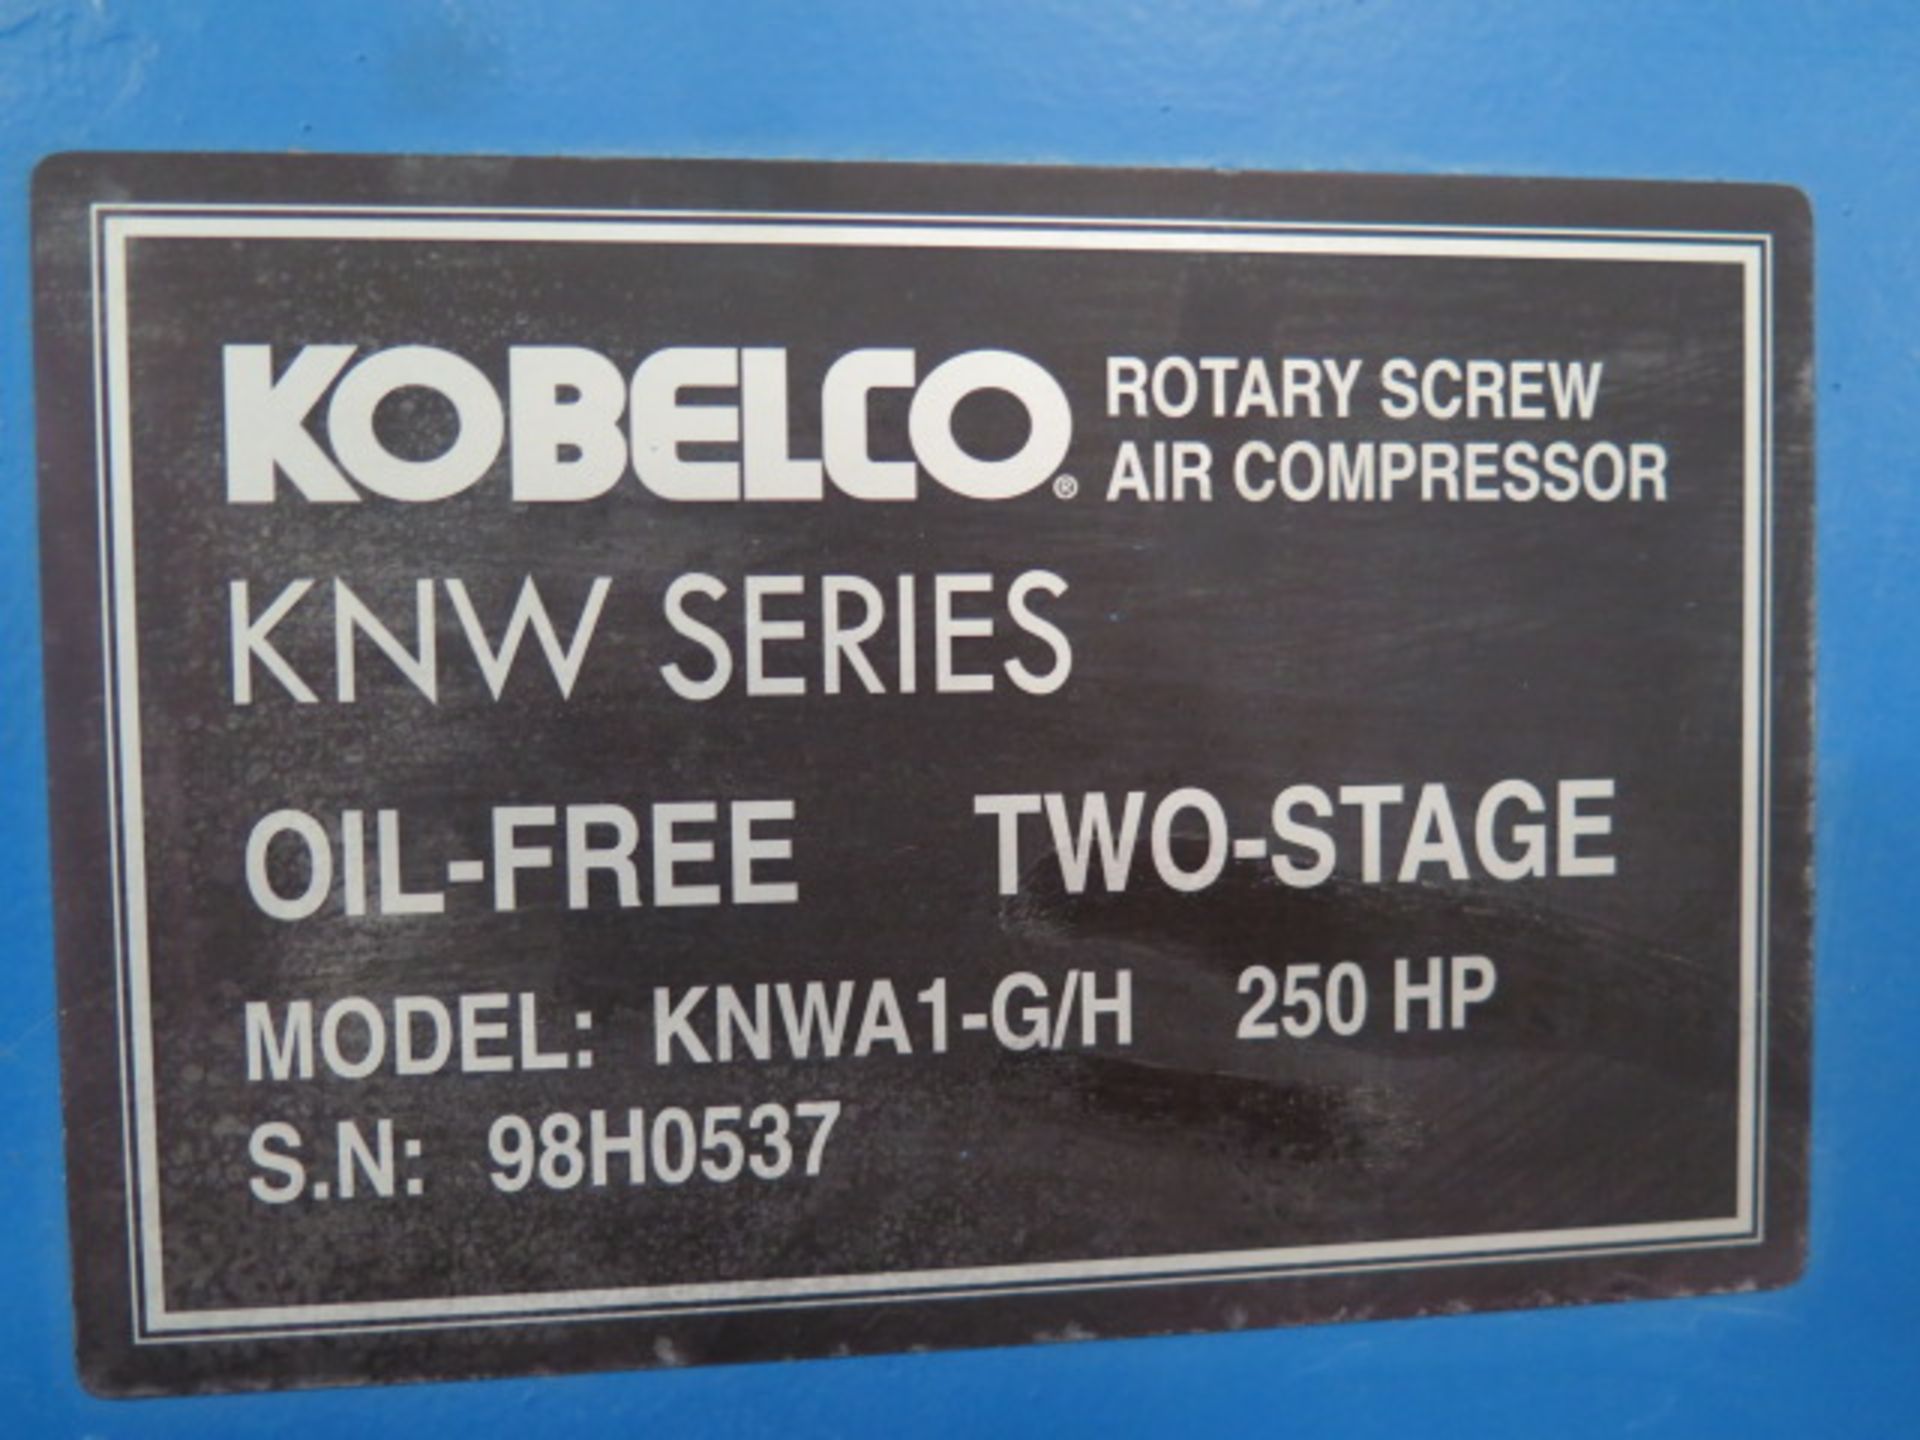 Kobelco KNWA1-G/H 250Hp Rotary Air Compressor s/n 98H0537 w/ PLC Controls SOLD AS-IS - Image 10 of 10